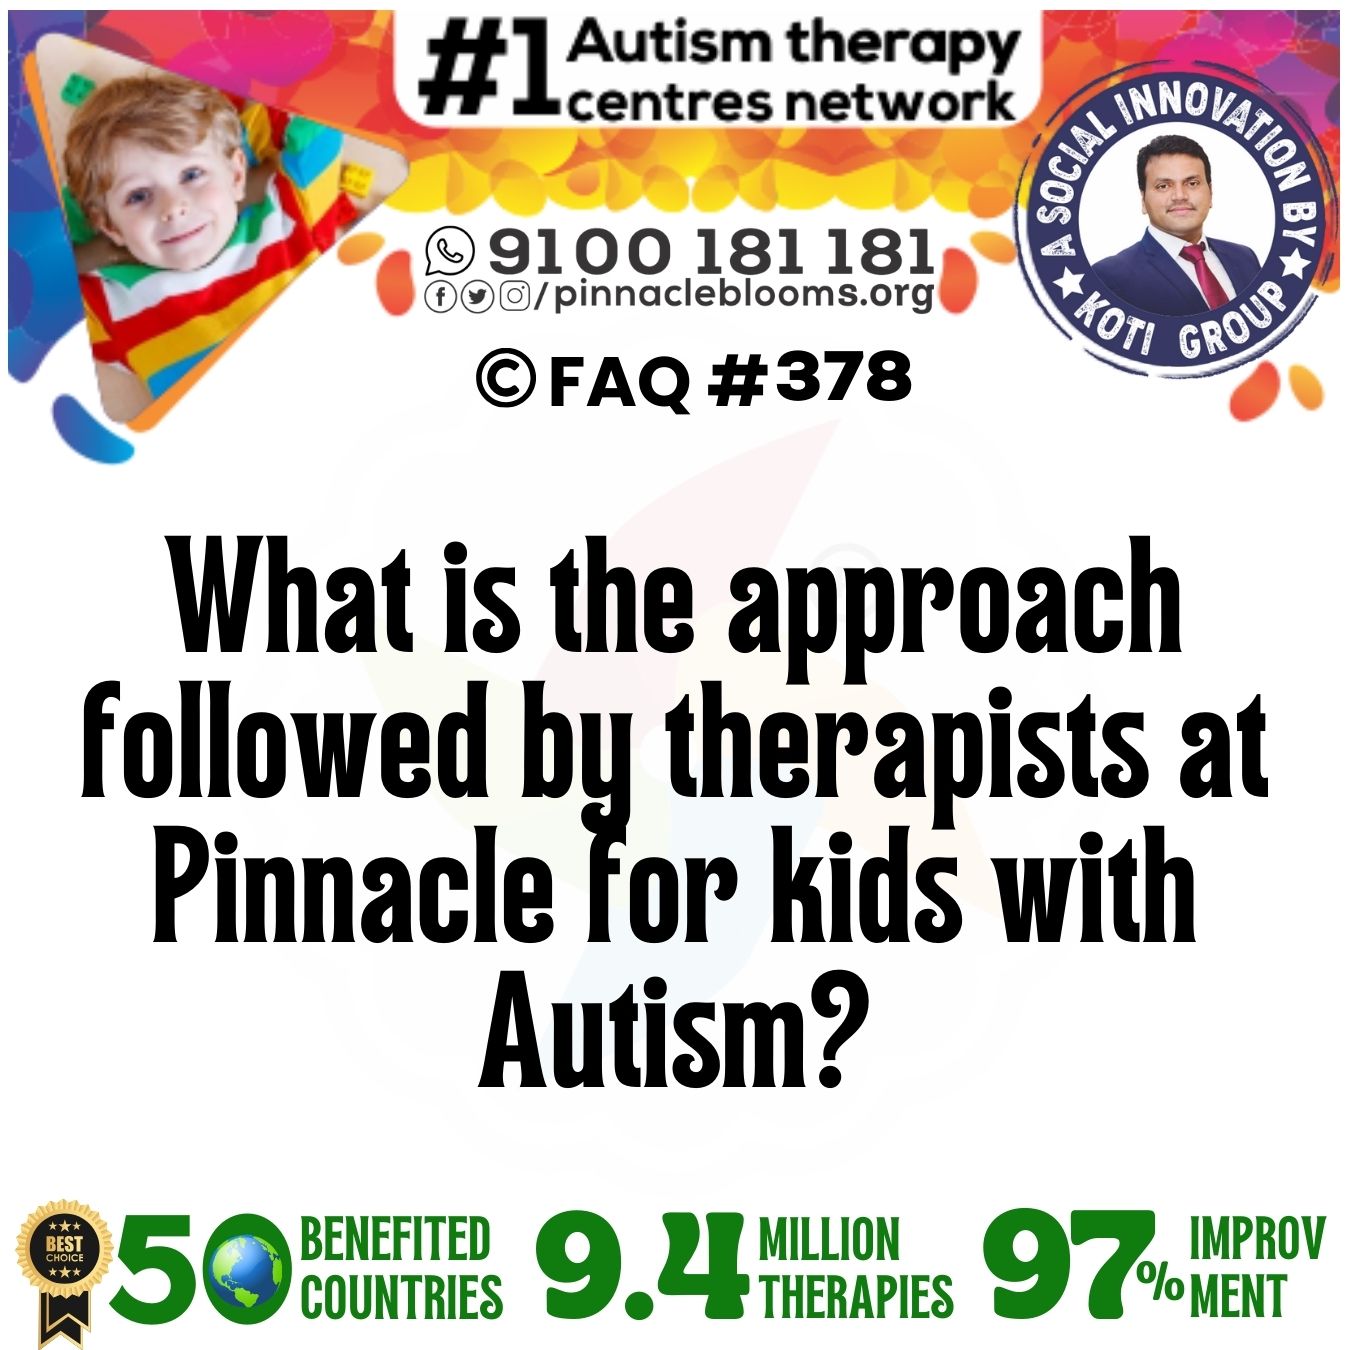 What is the approach followed by therapists at Pinnacle for kids with Autism?